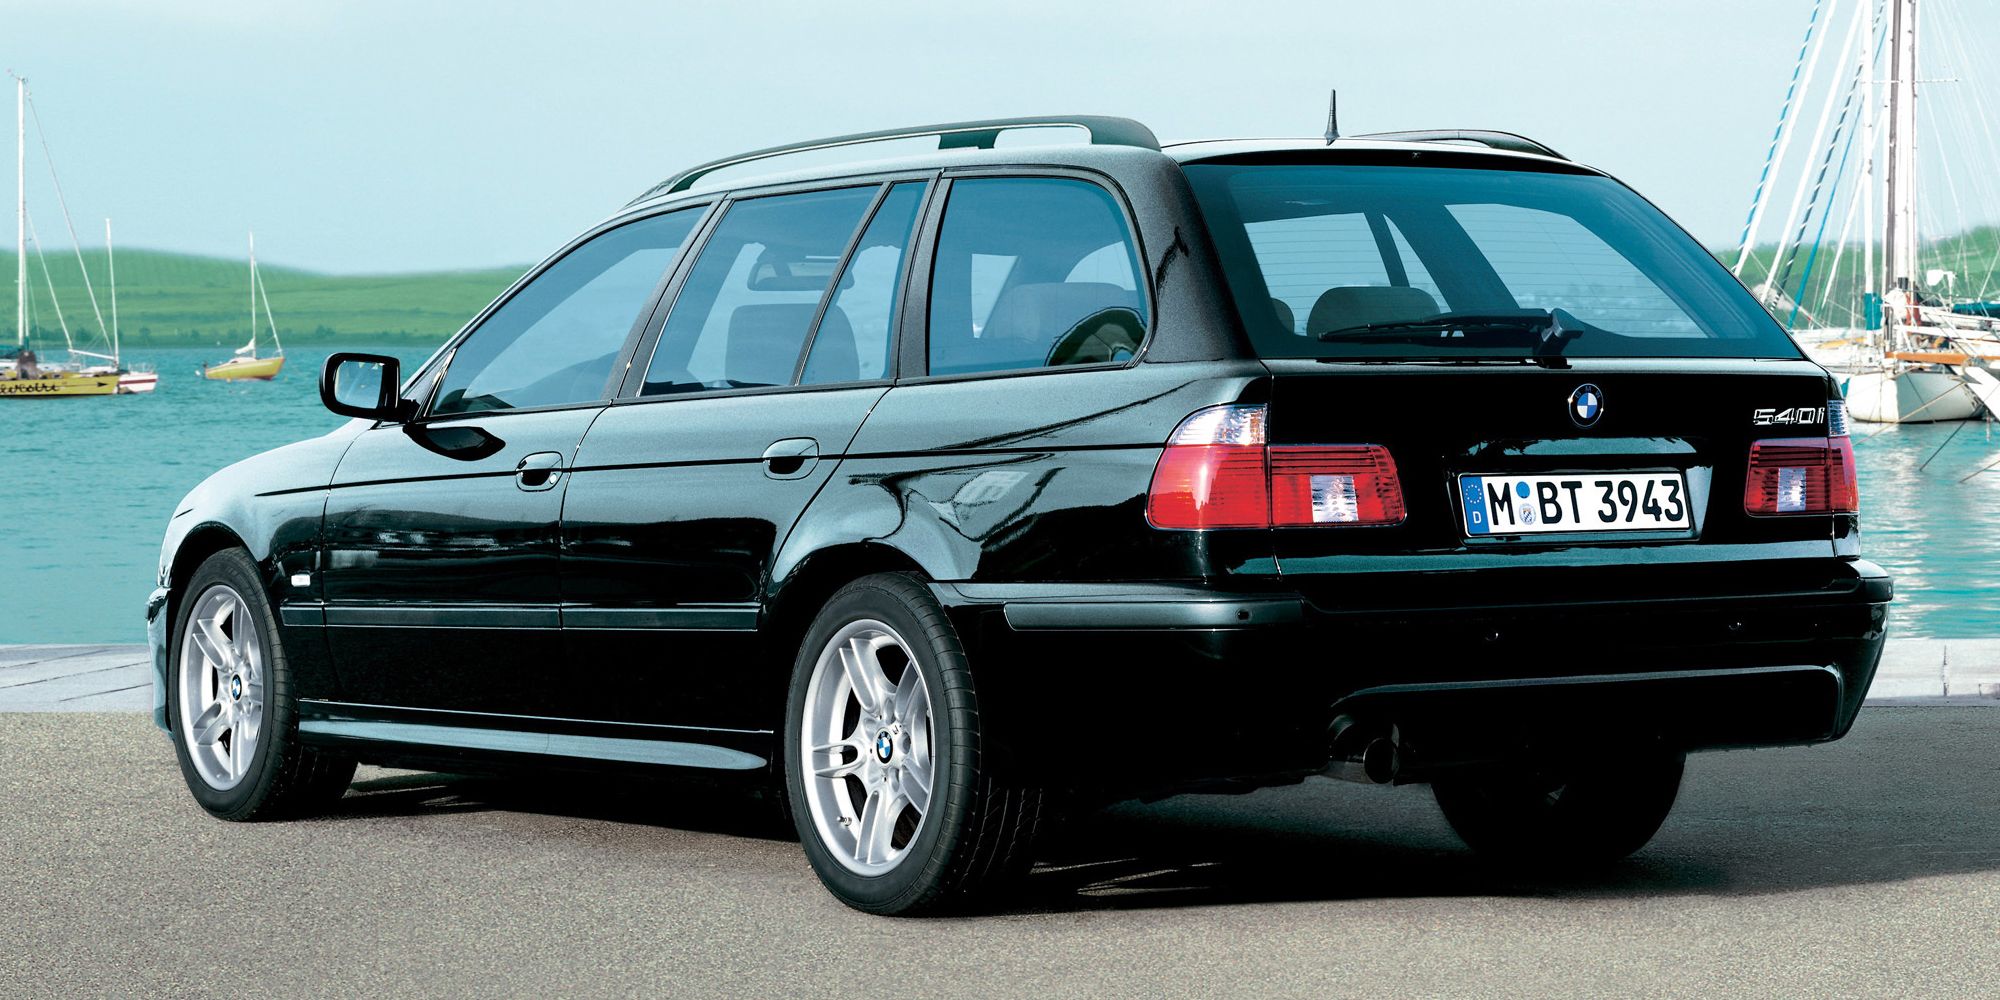 Rear 3/4 view of a black 540i Touring